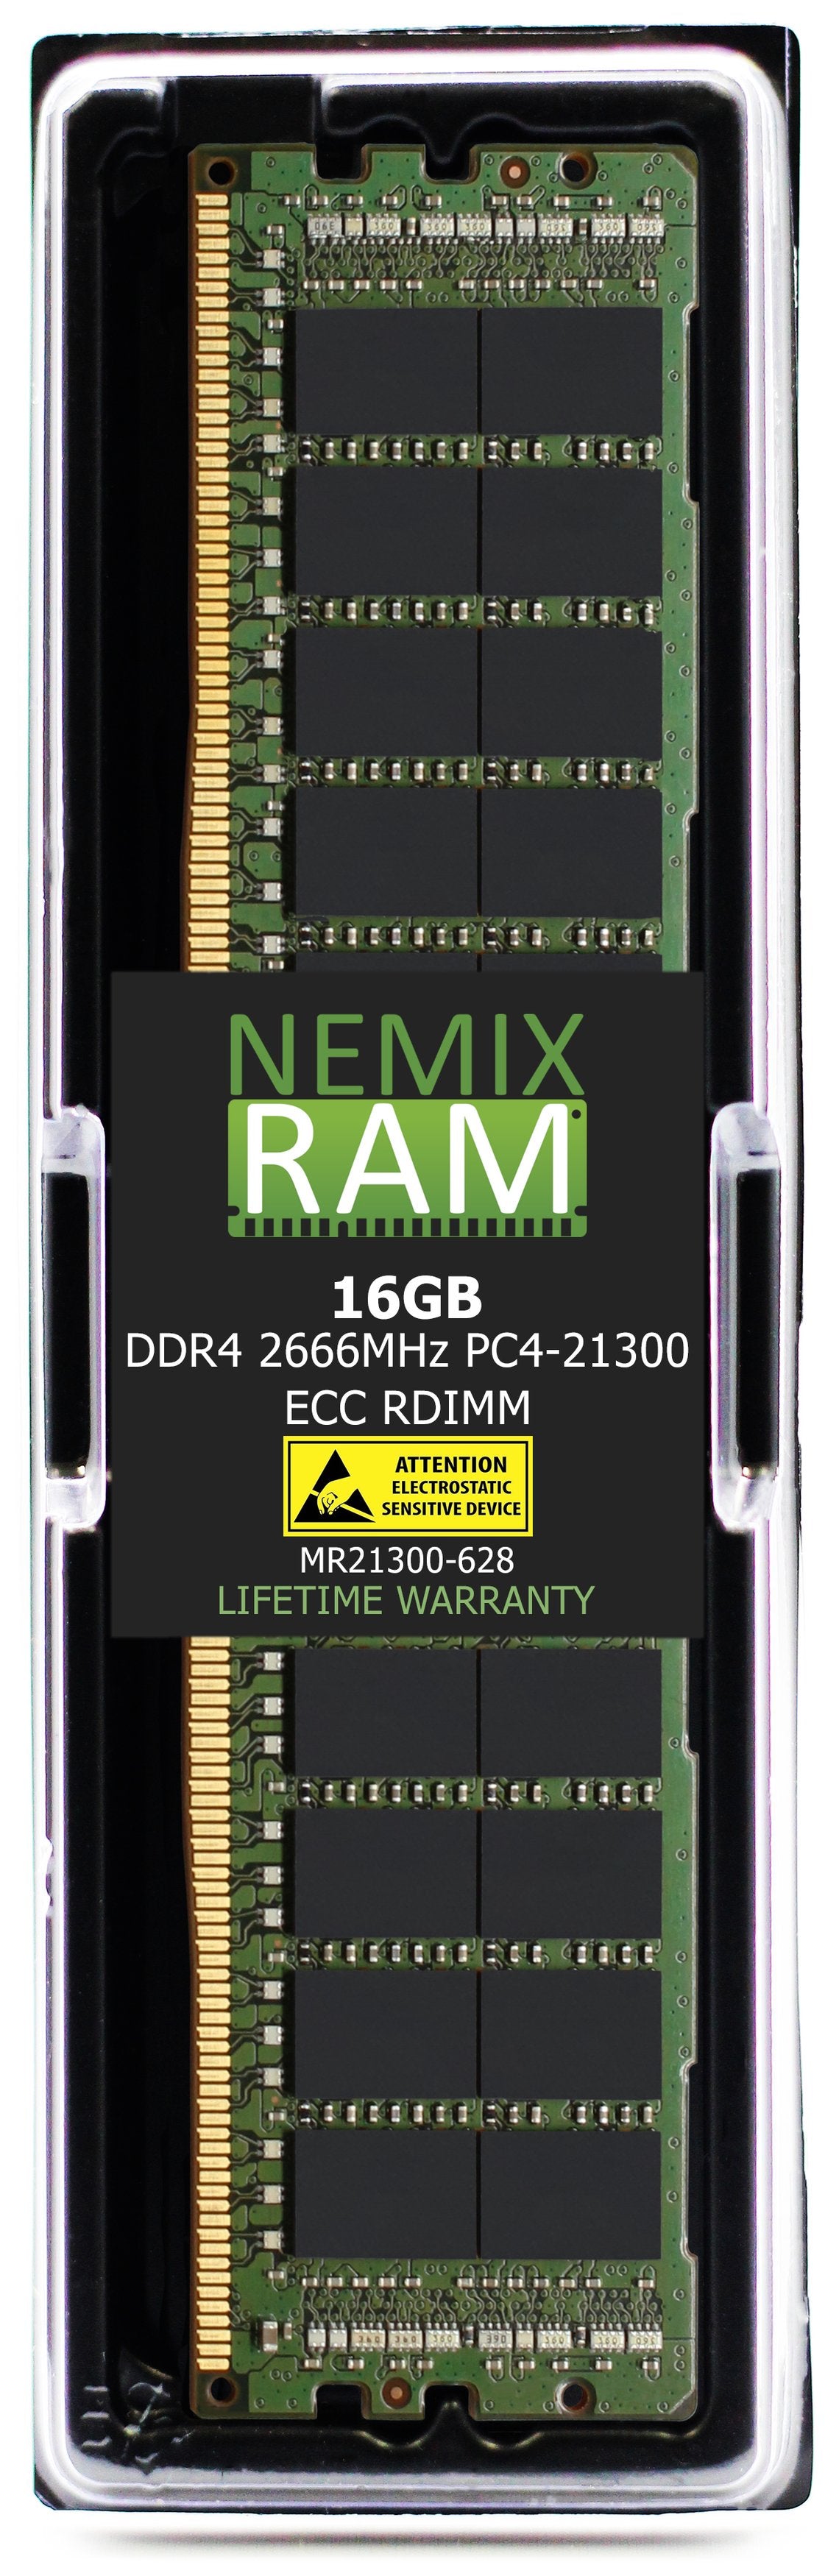 16GB DDR4 2666MHZ PC4-21300 RDIMM Compatible with Supermicro MEM-DR416LD-ER26